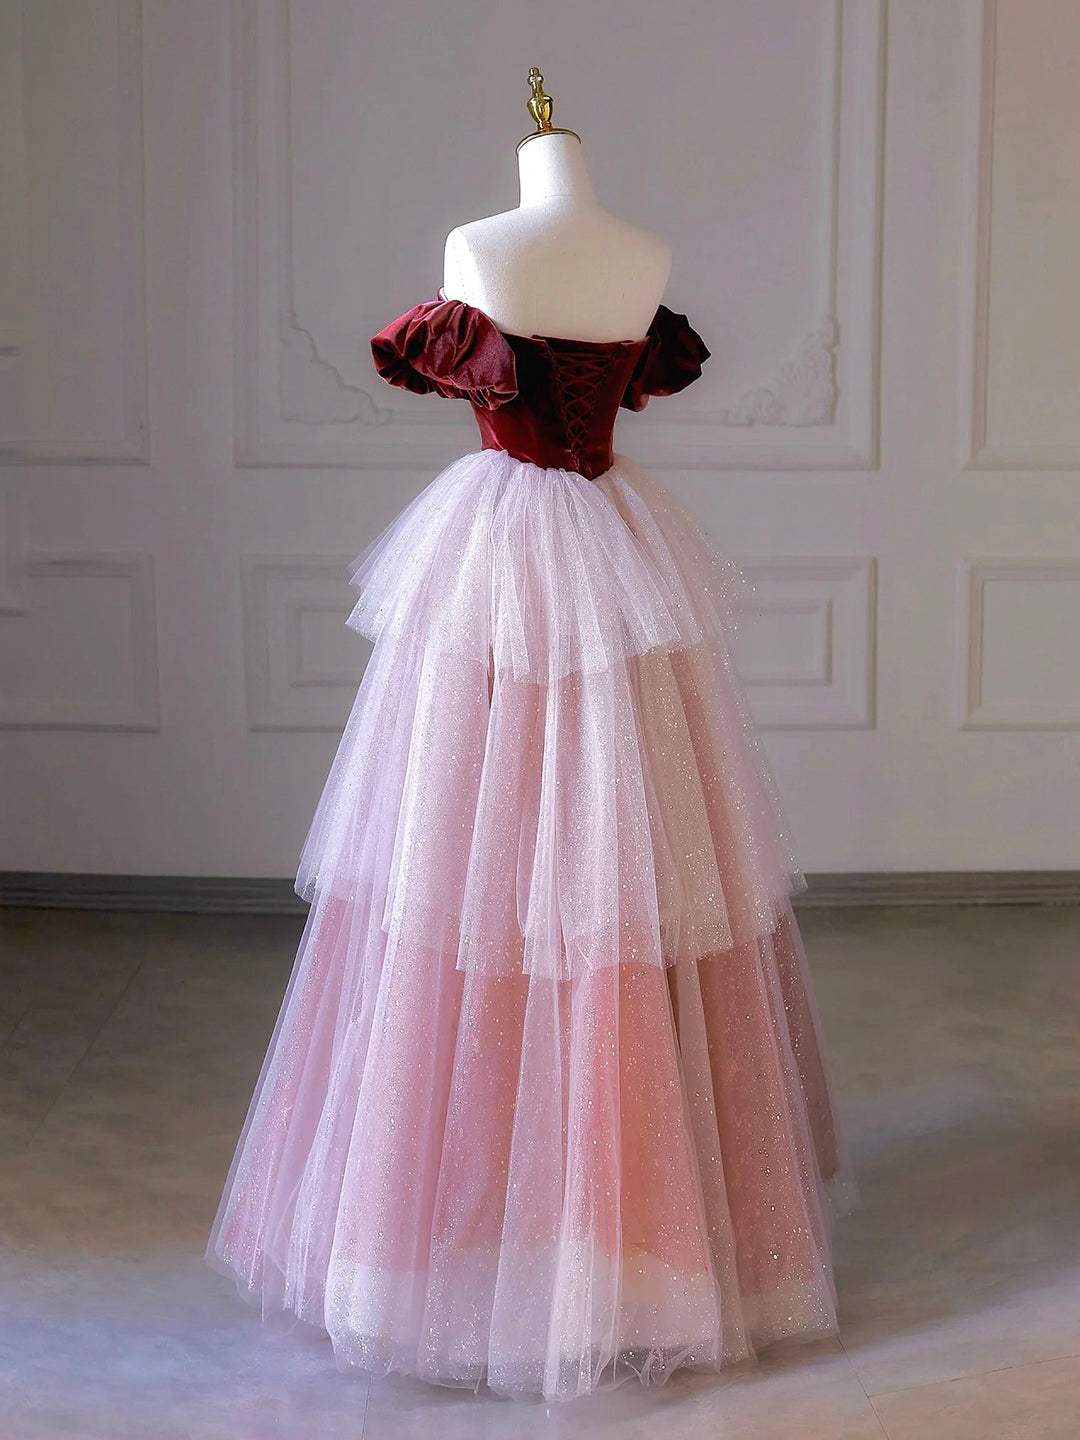 Party Dress Look, Burgundy Velvet and Layers Tulle Long Prom Dress, Off the Shoulder A-Line Evening Party Dress